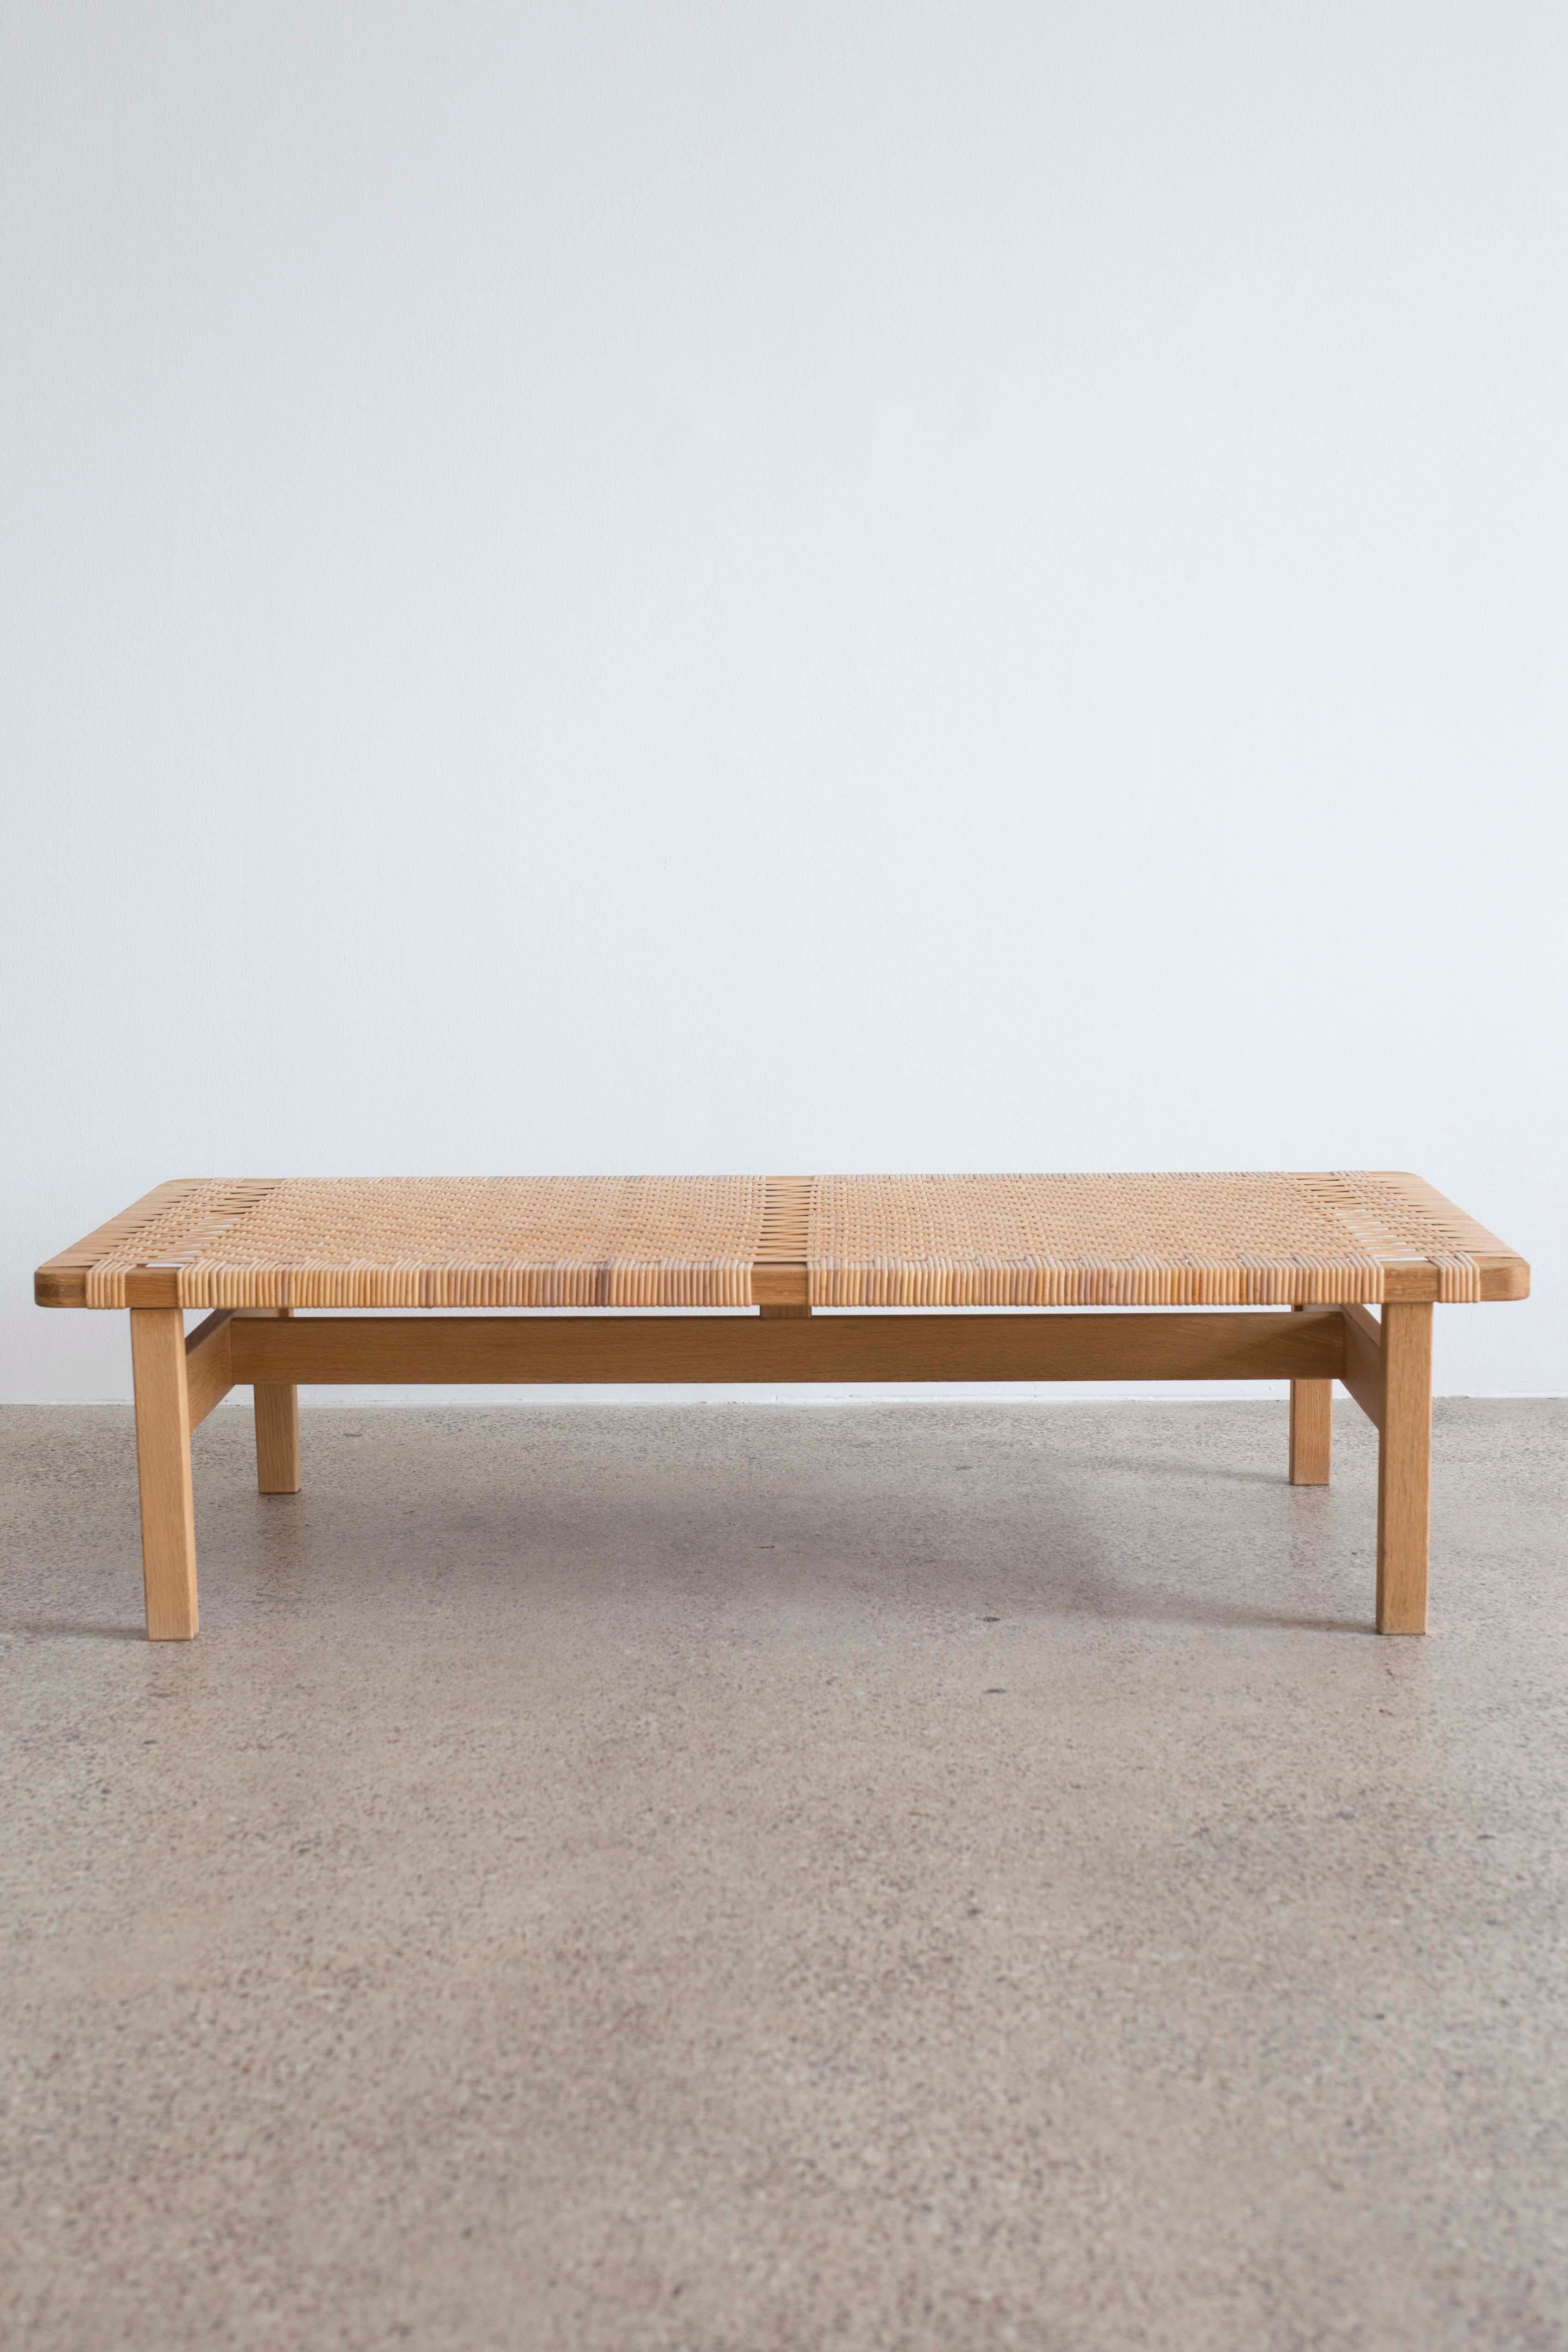 Rare large version of the Børge Mogensen bench. Original patinated oak and woven cane.

Designed by Børge Mogensen 1955 and made at Fredericia Stolefabrik, Denmark.